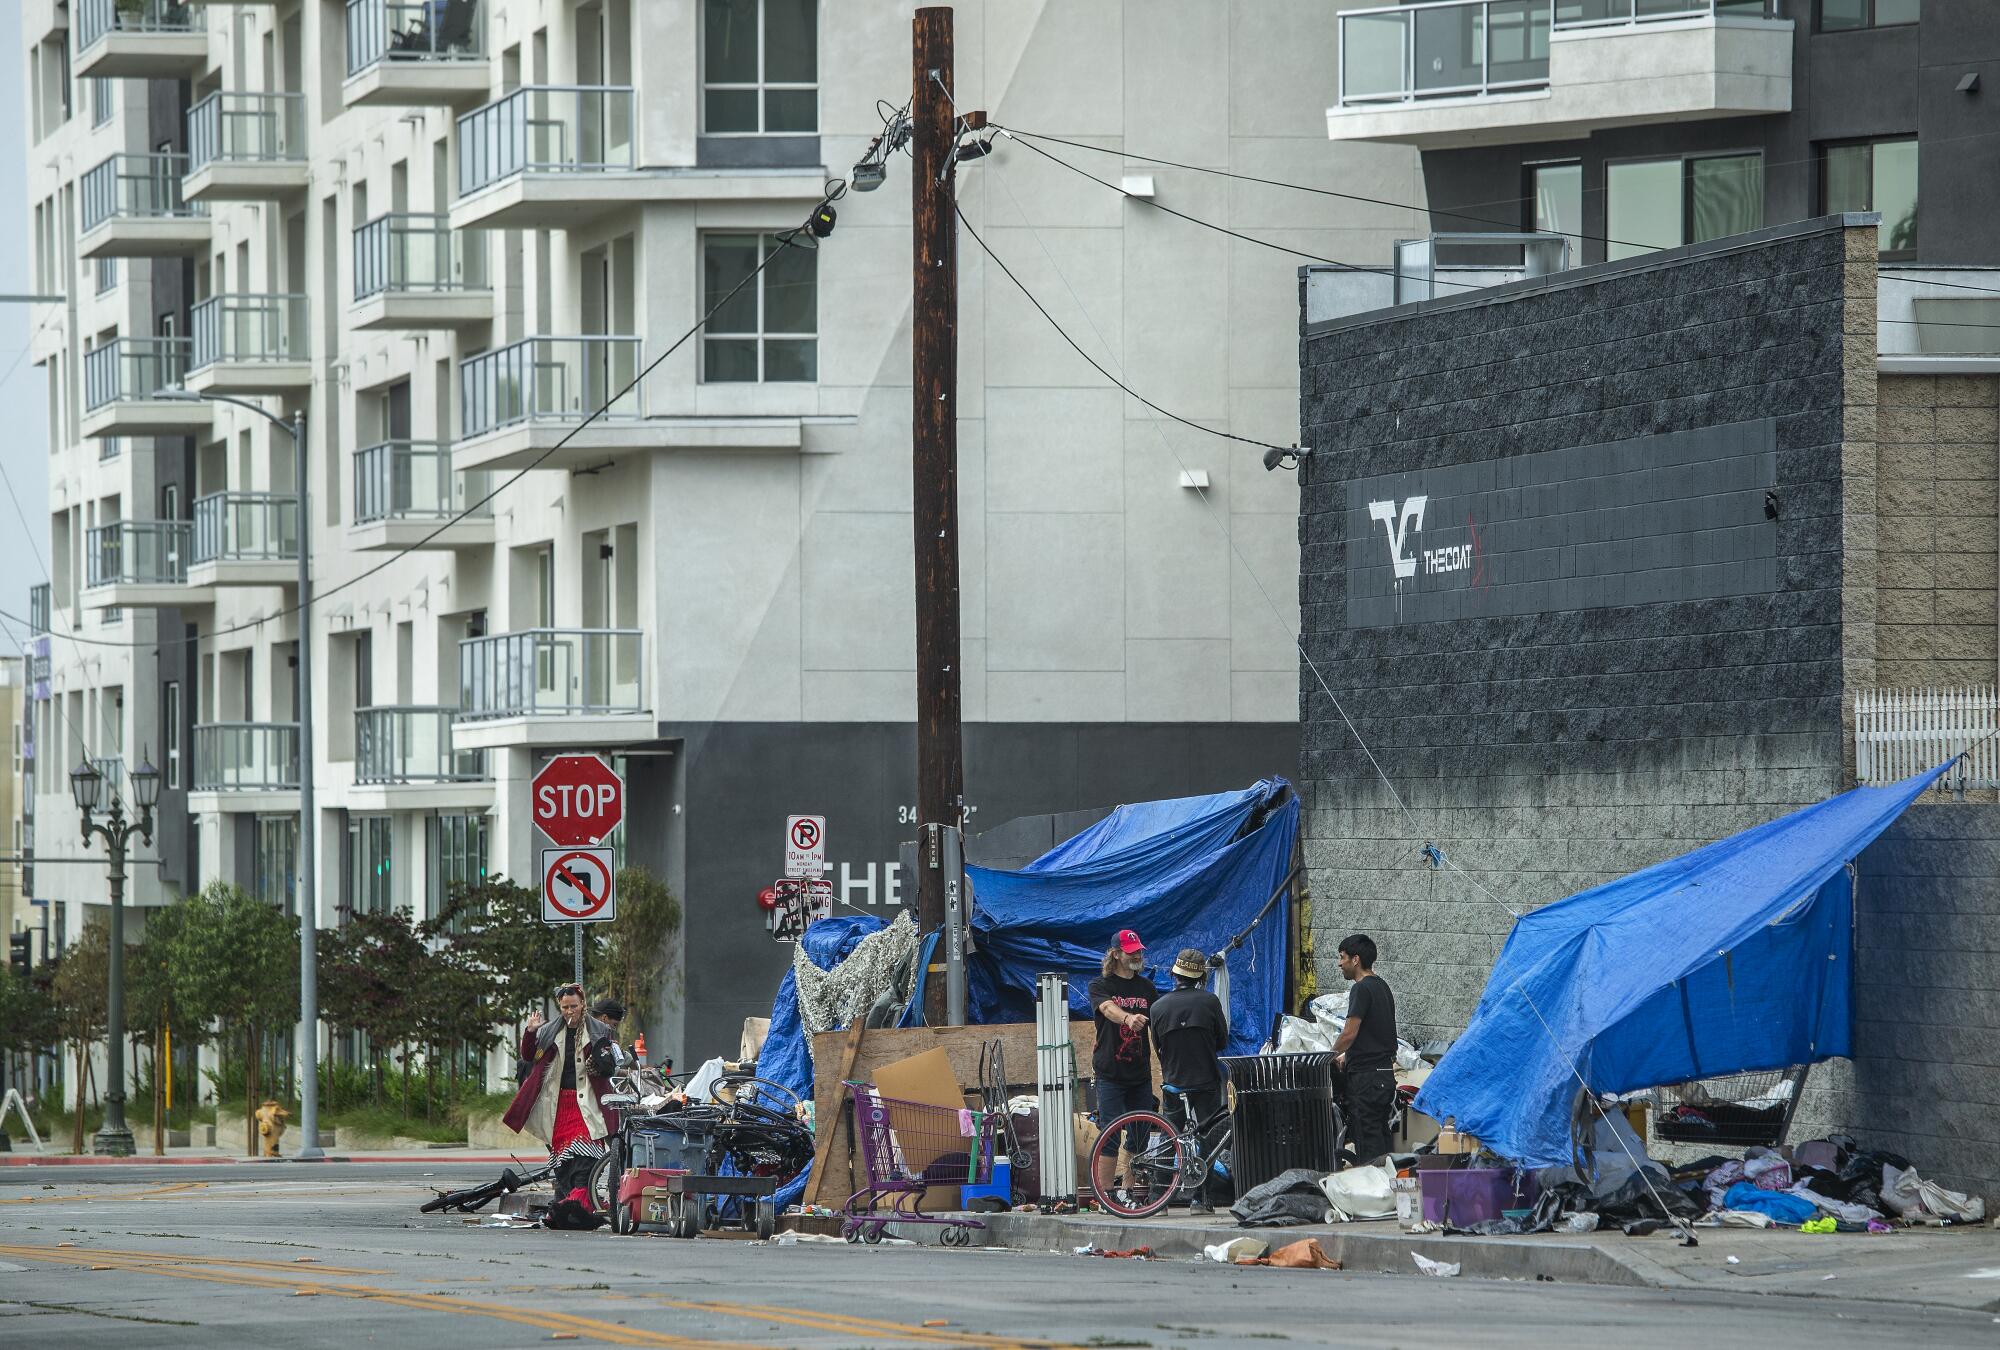 People and tents on the street with a high-rise behind them.